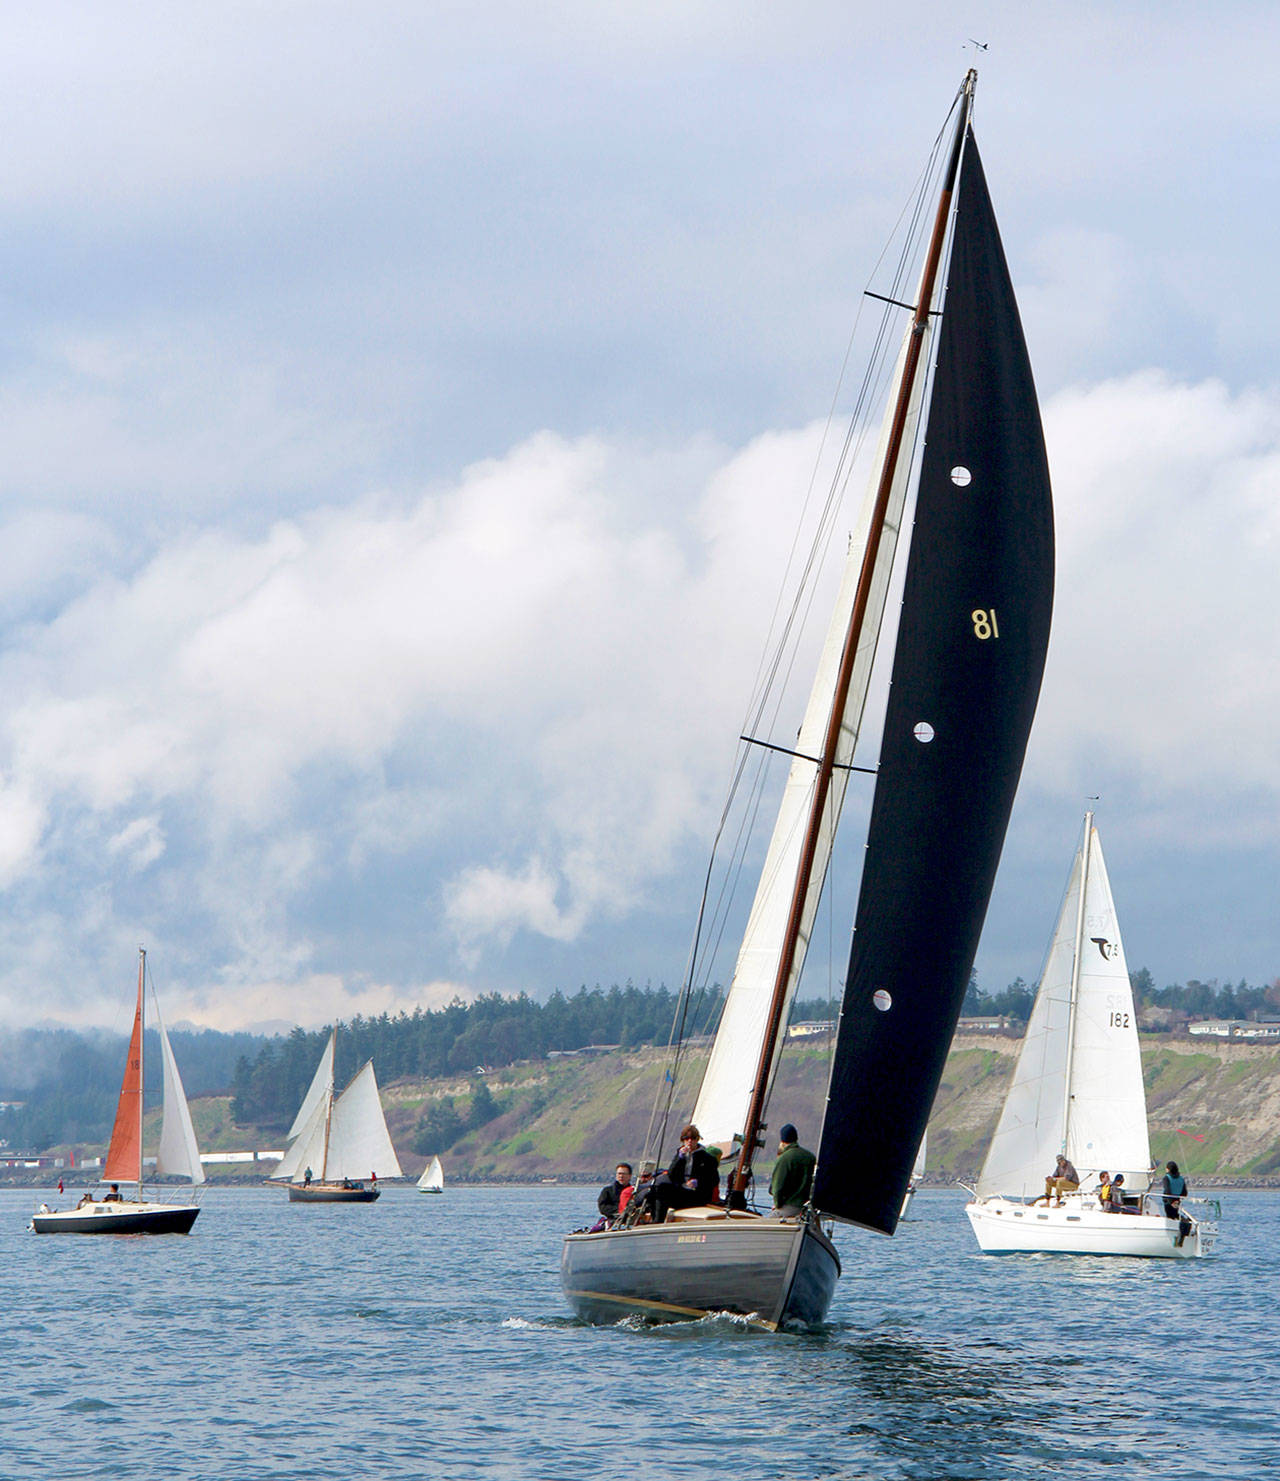 The 28th Shipwrights’ Regatta will launch the beginning of the 2019 sailing season Saturday, even if showers and wind are forecast. (Ace Spragg)